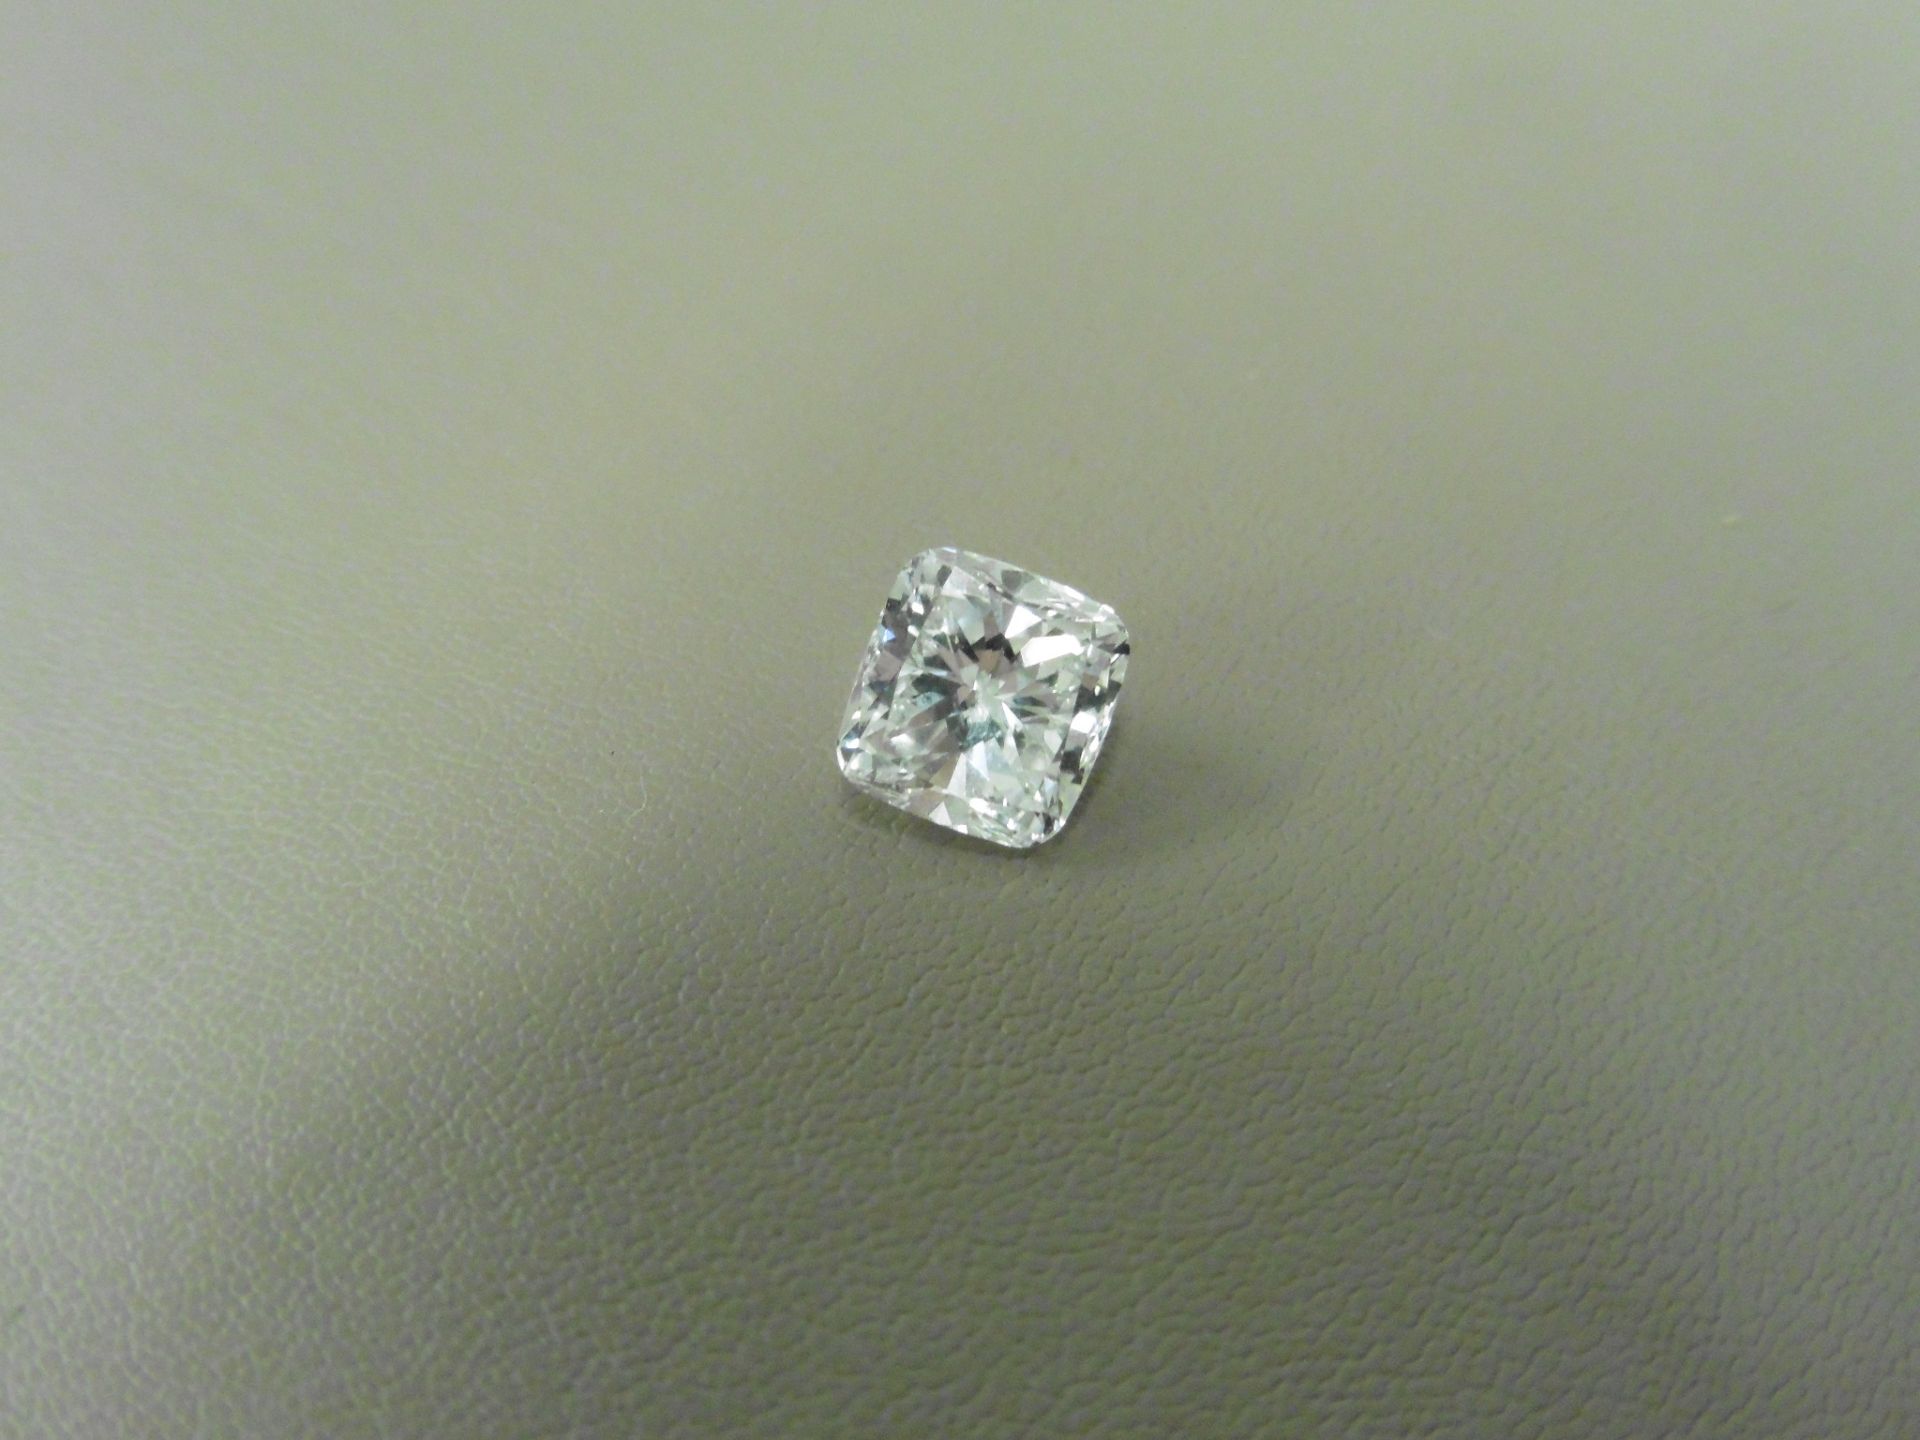 1.71ct natural cushion cut diamond. F colour and VS2 clarity. GIA certification. Valued at £33000 - Image 3 of 4